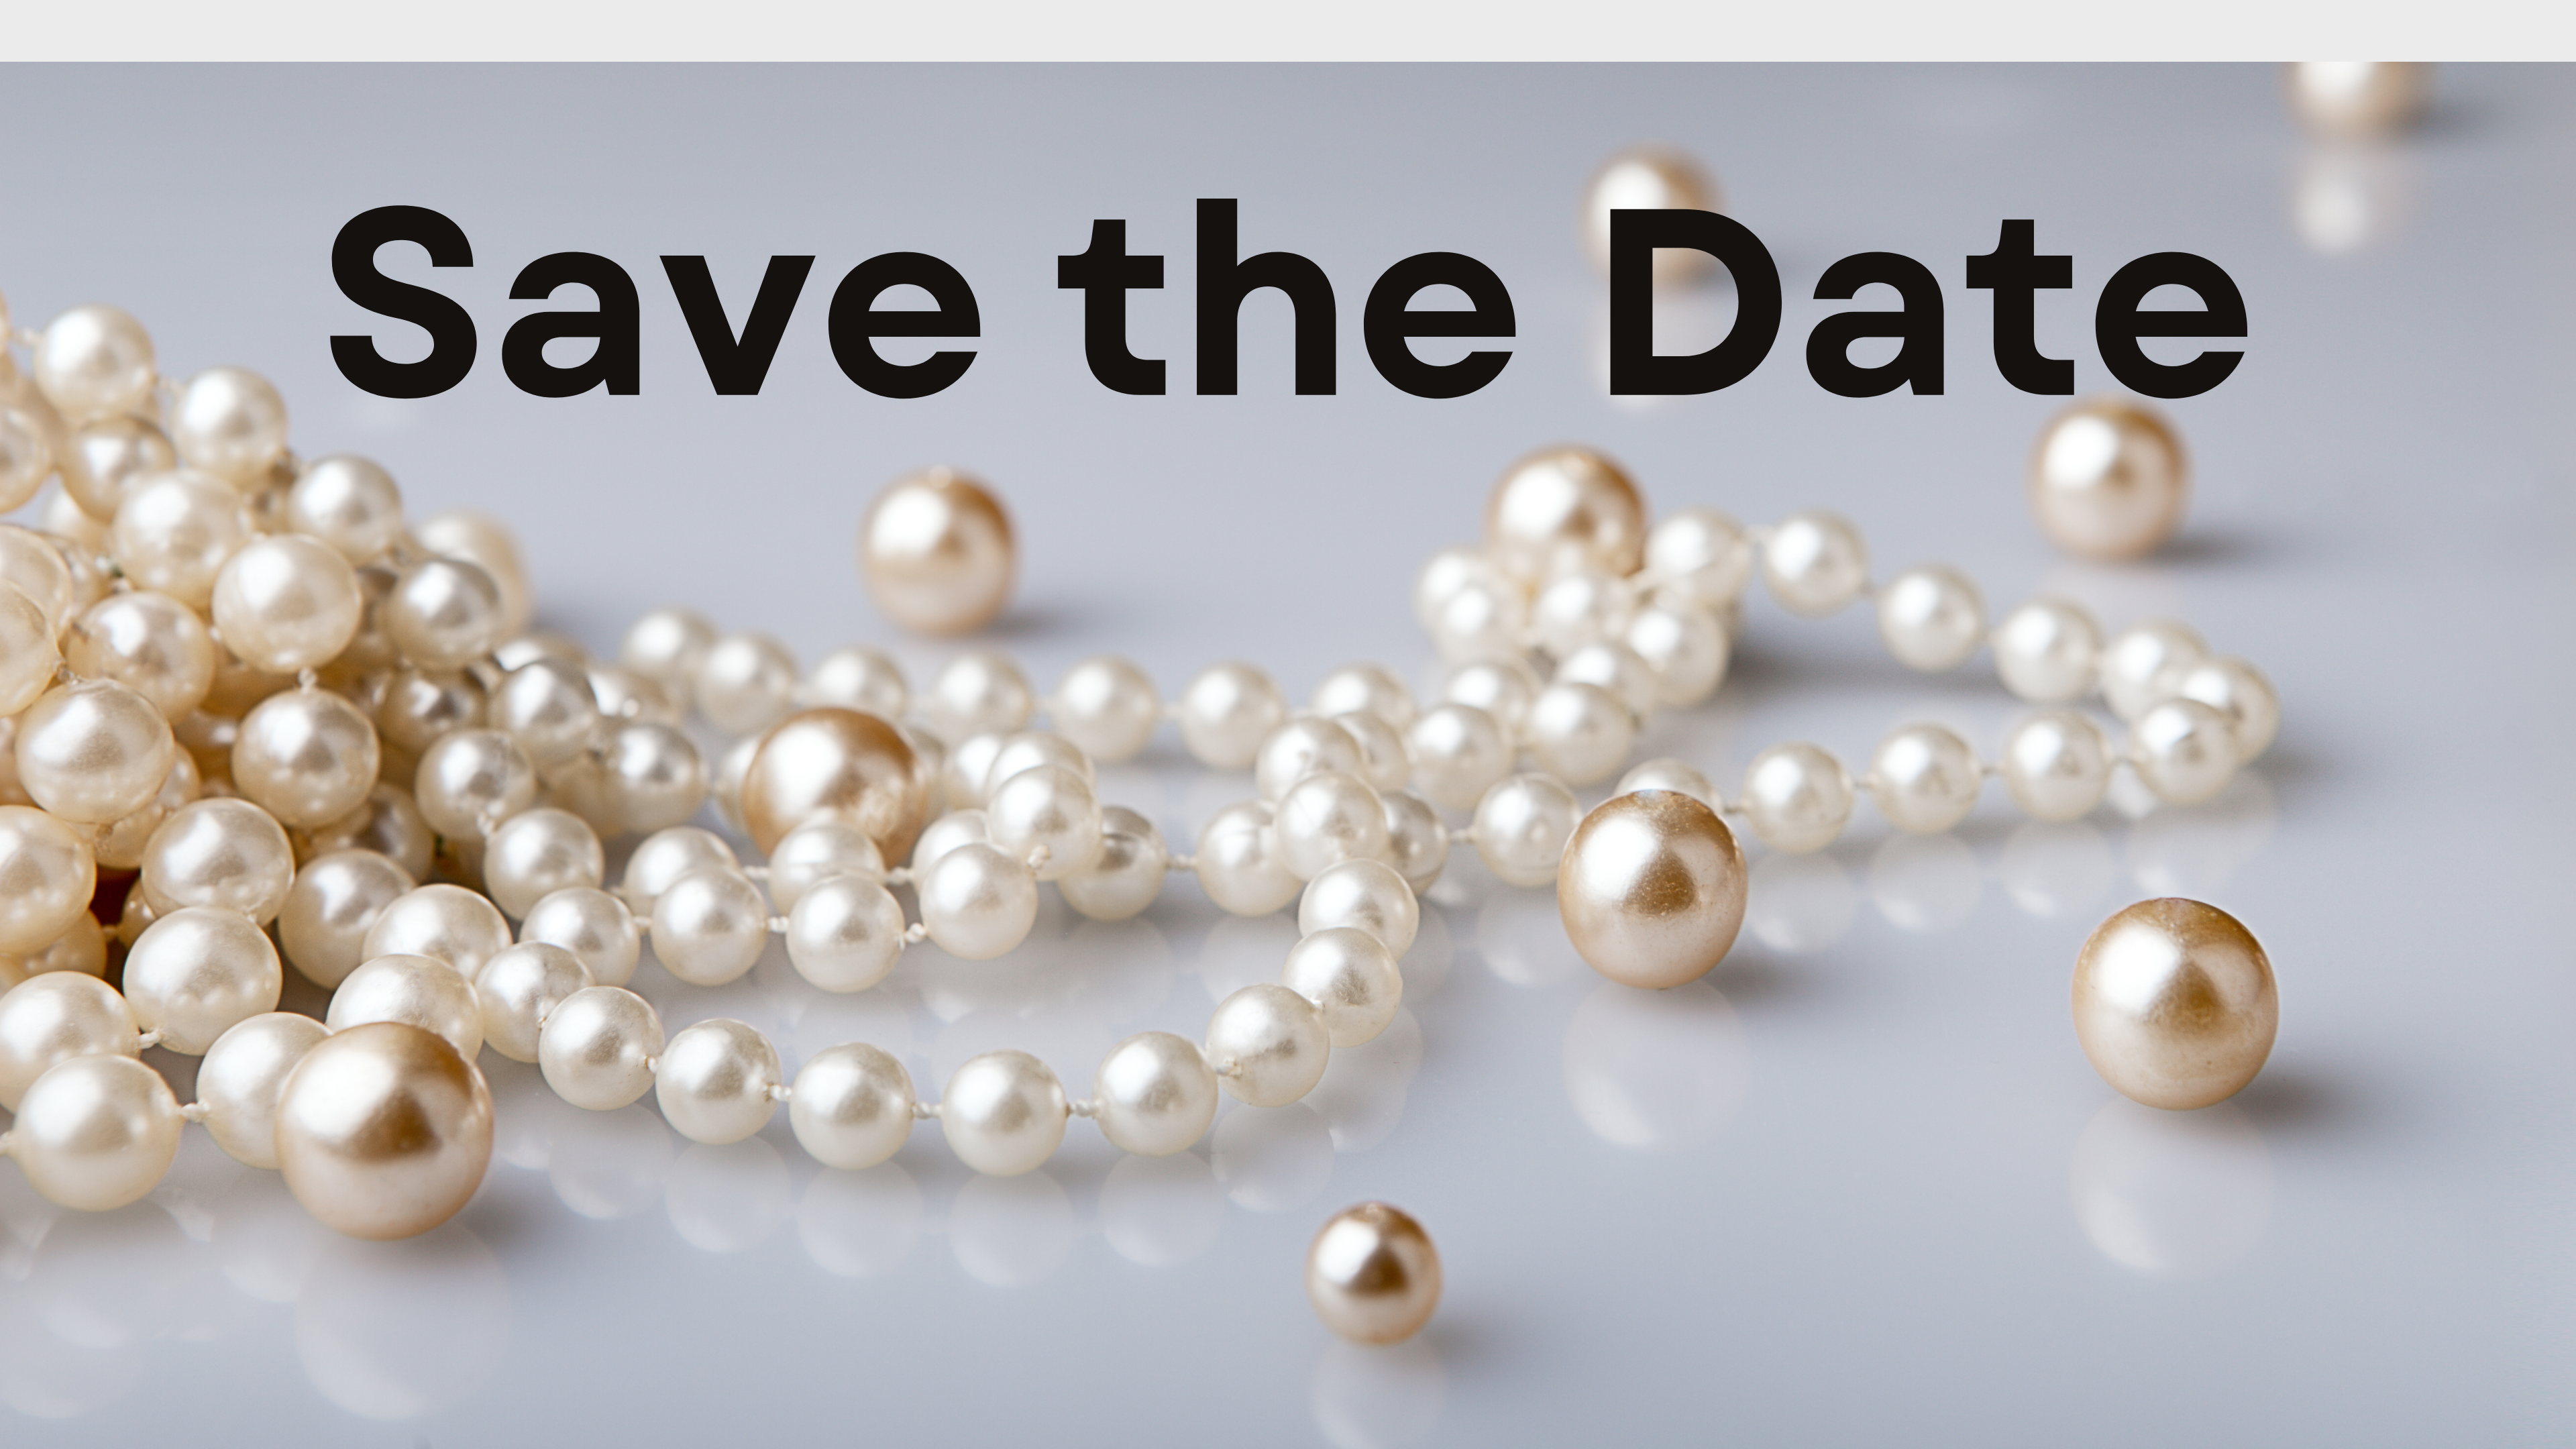 Save the Date with perals scattered across the image.